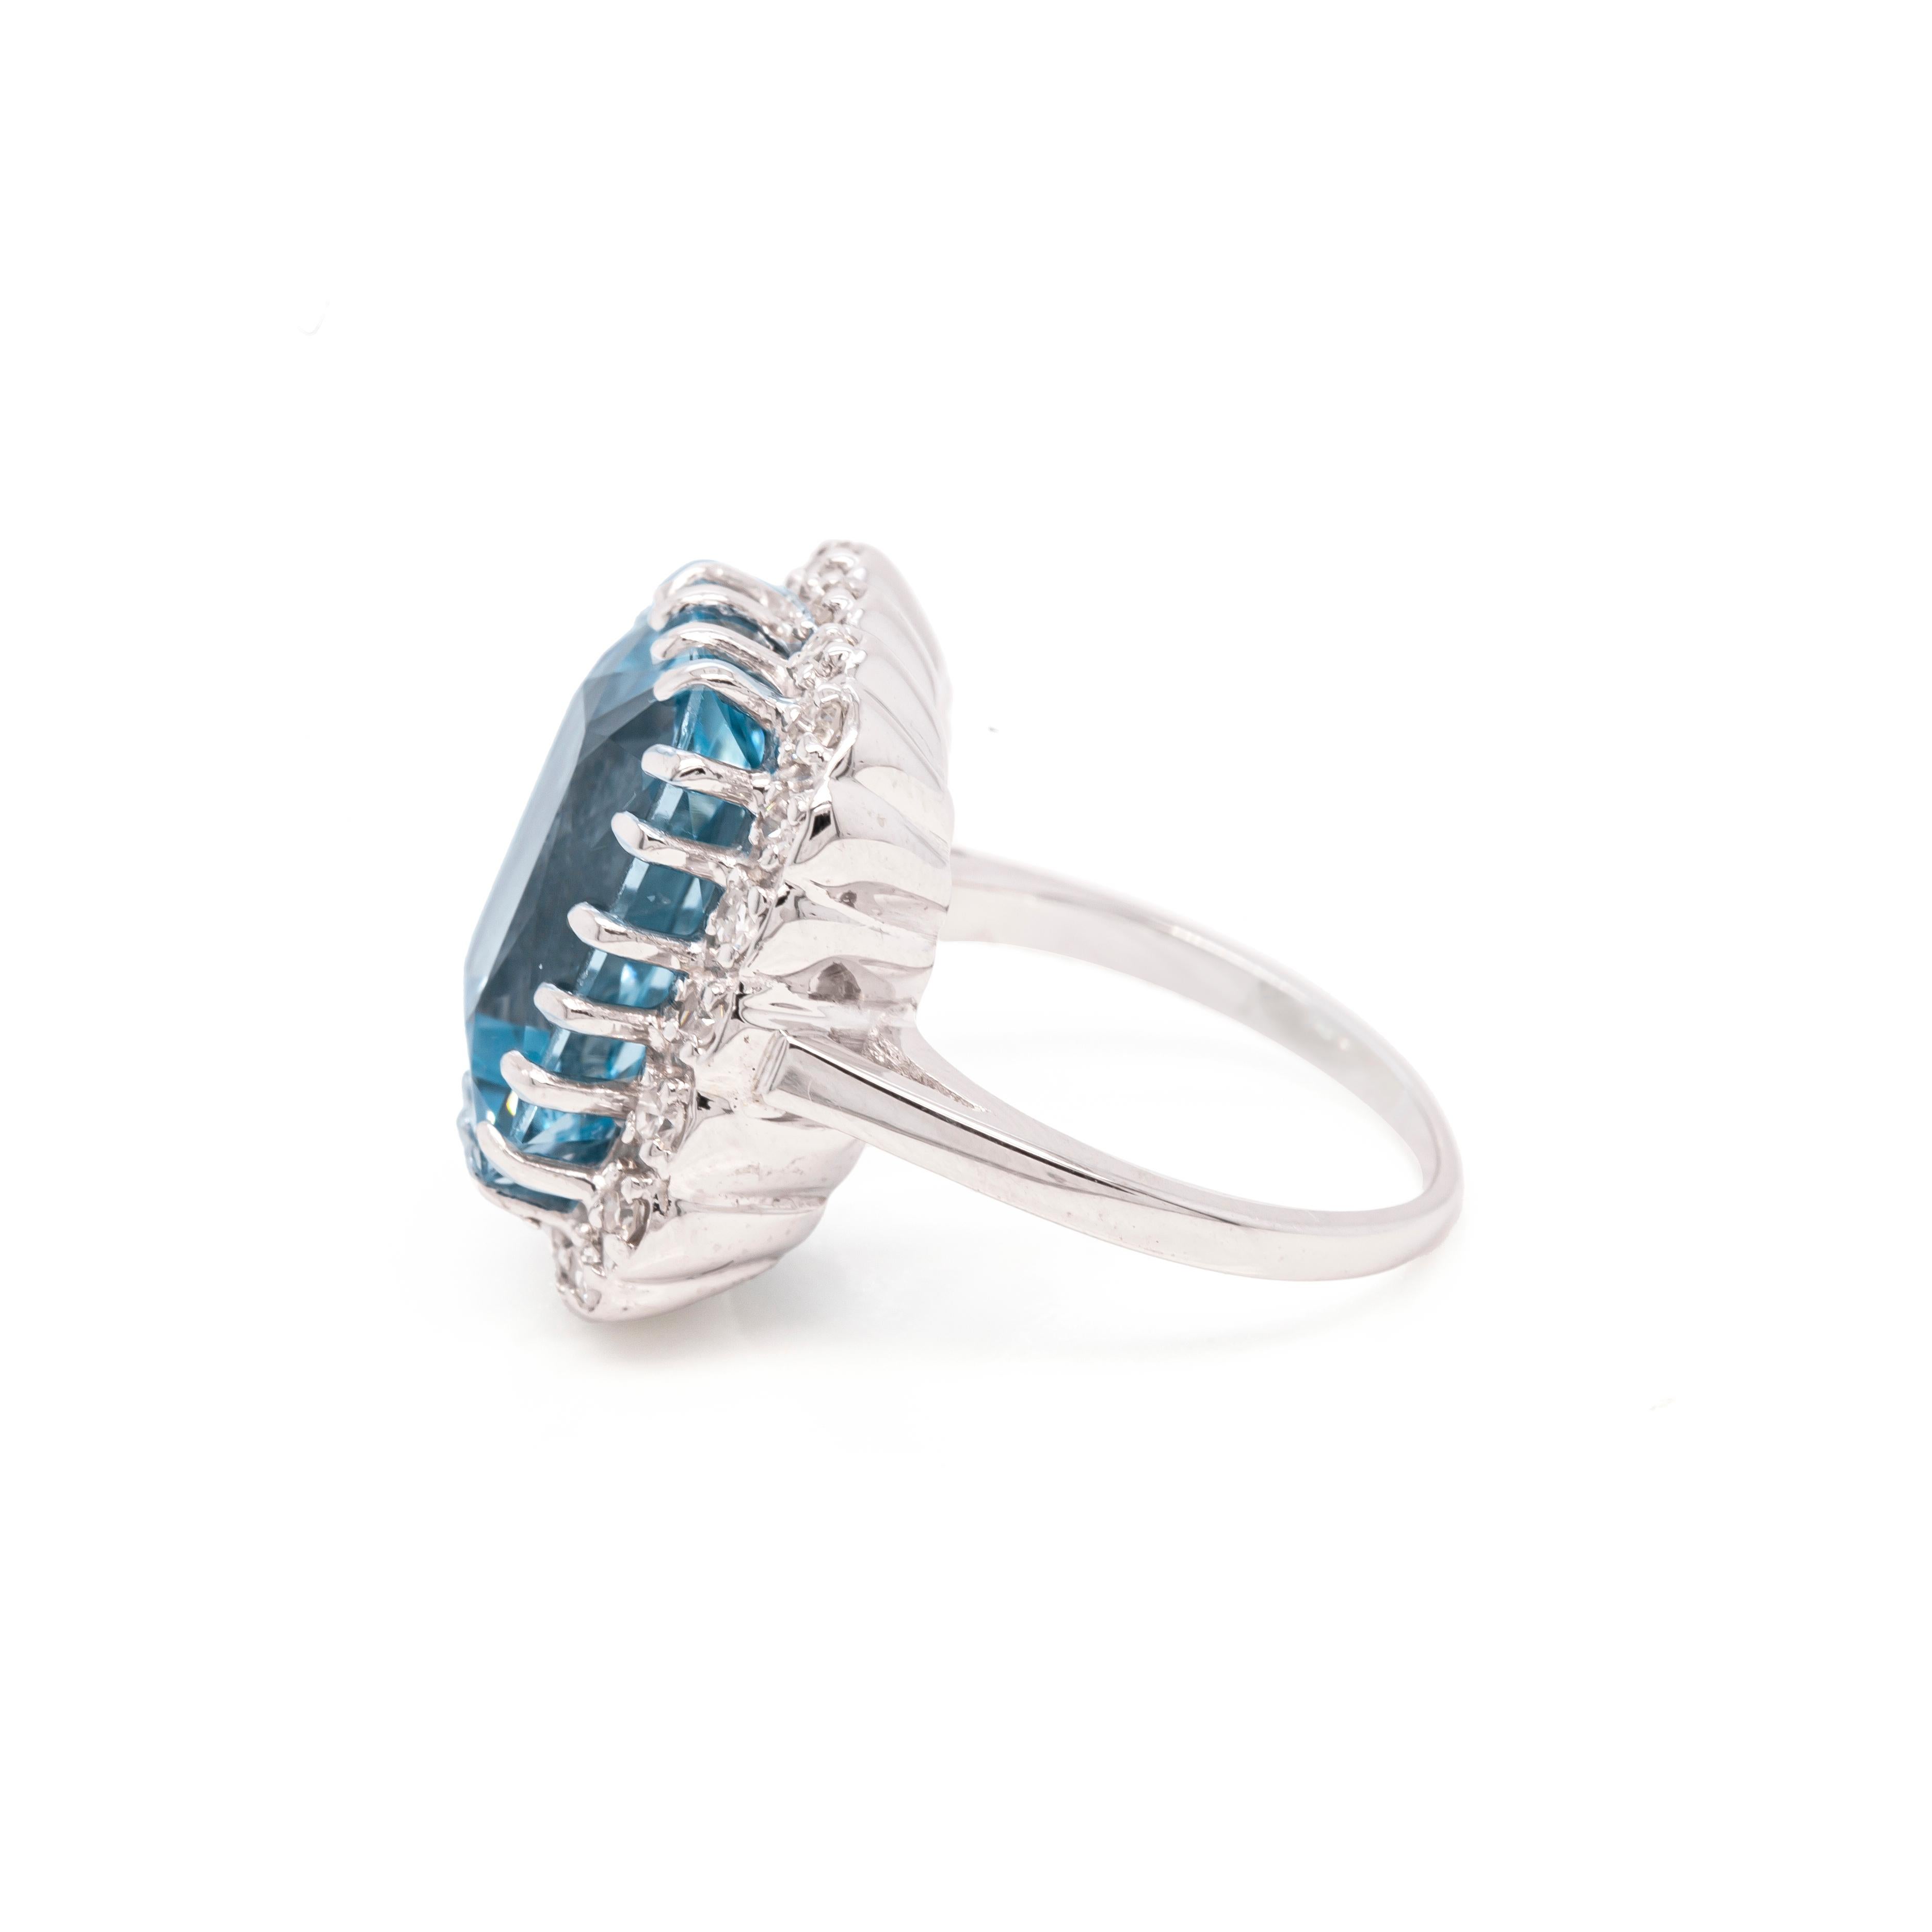 This spectacular 14 carat white gold cocktail ring features a rectangular crisscut aquamarine in a rich sea-blue colour, weighing an impressive 14.46 carats, mounted in a twenty claw, open back setting. The breathtaking gemstone is beautifully